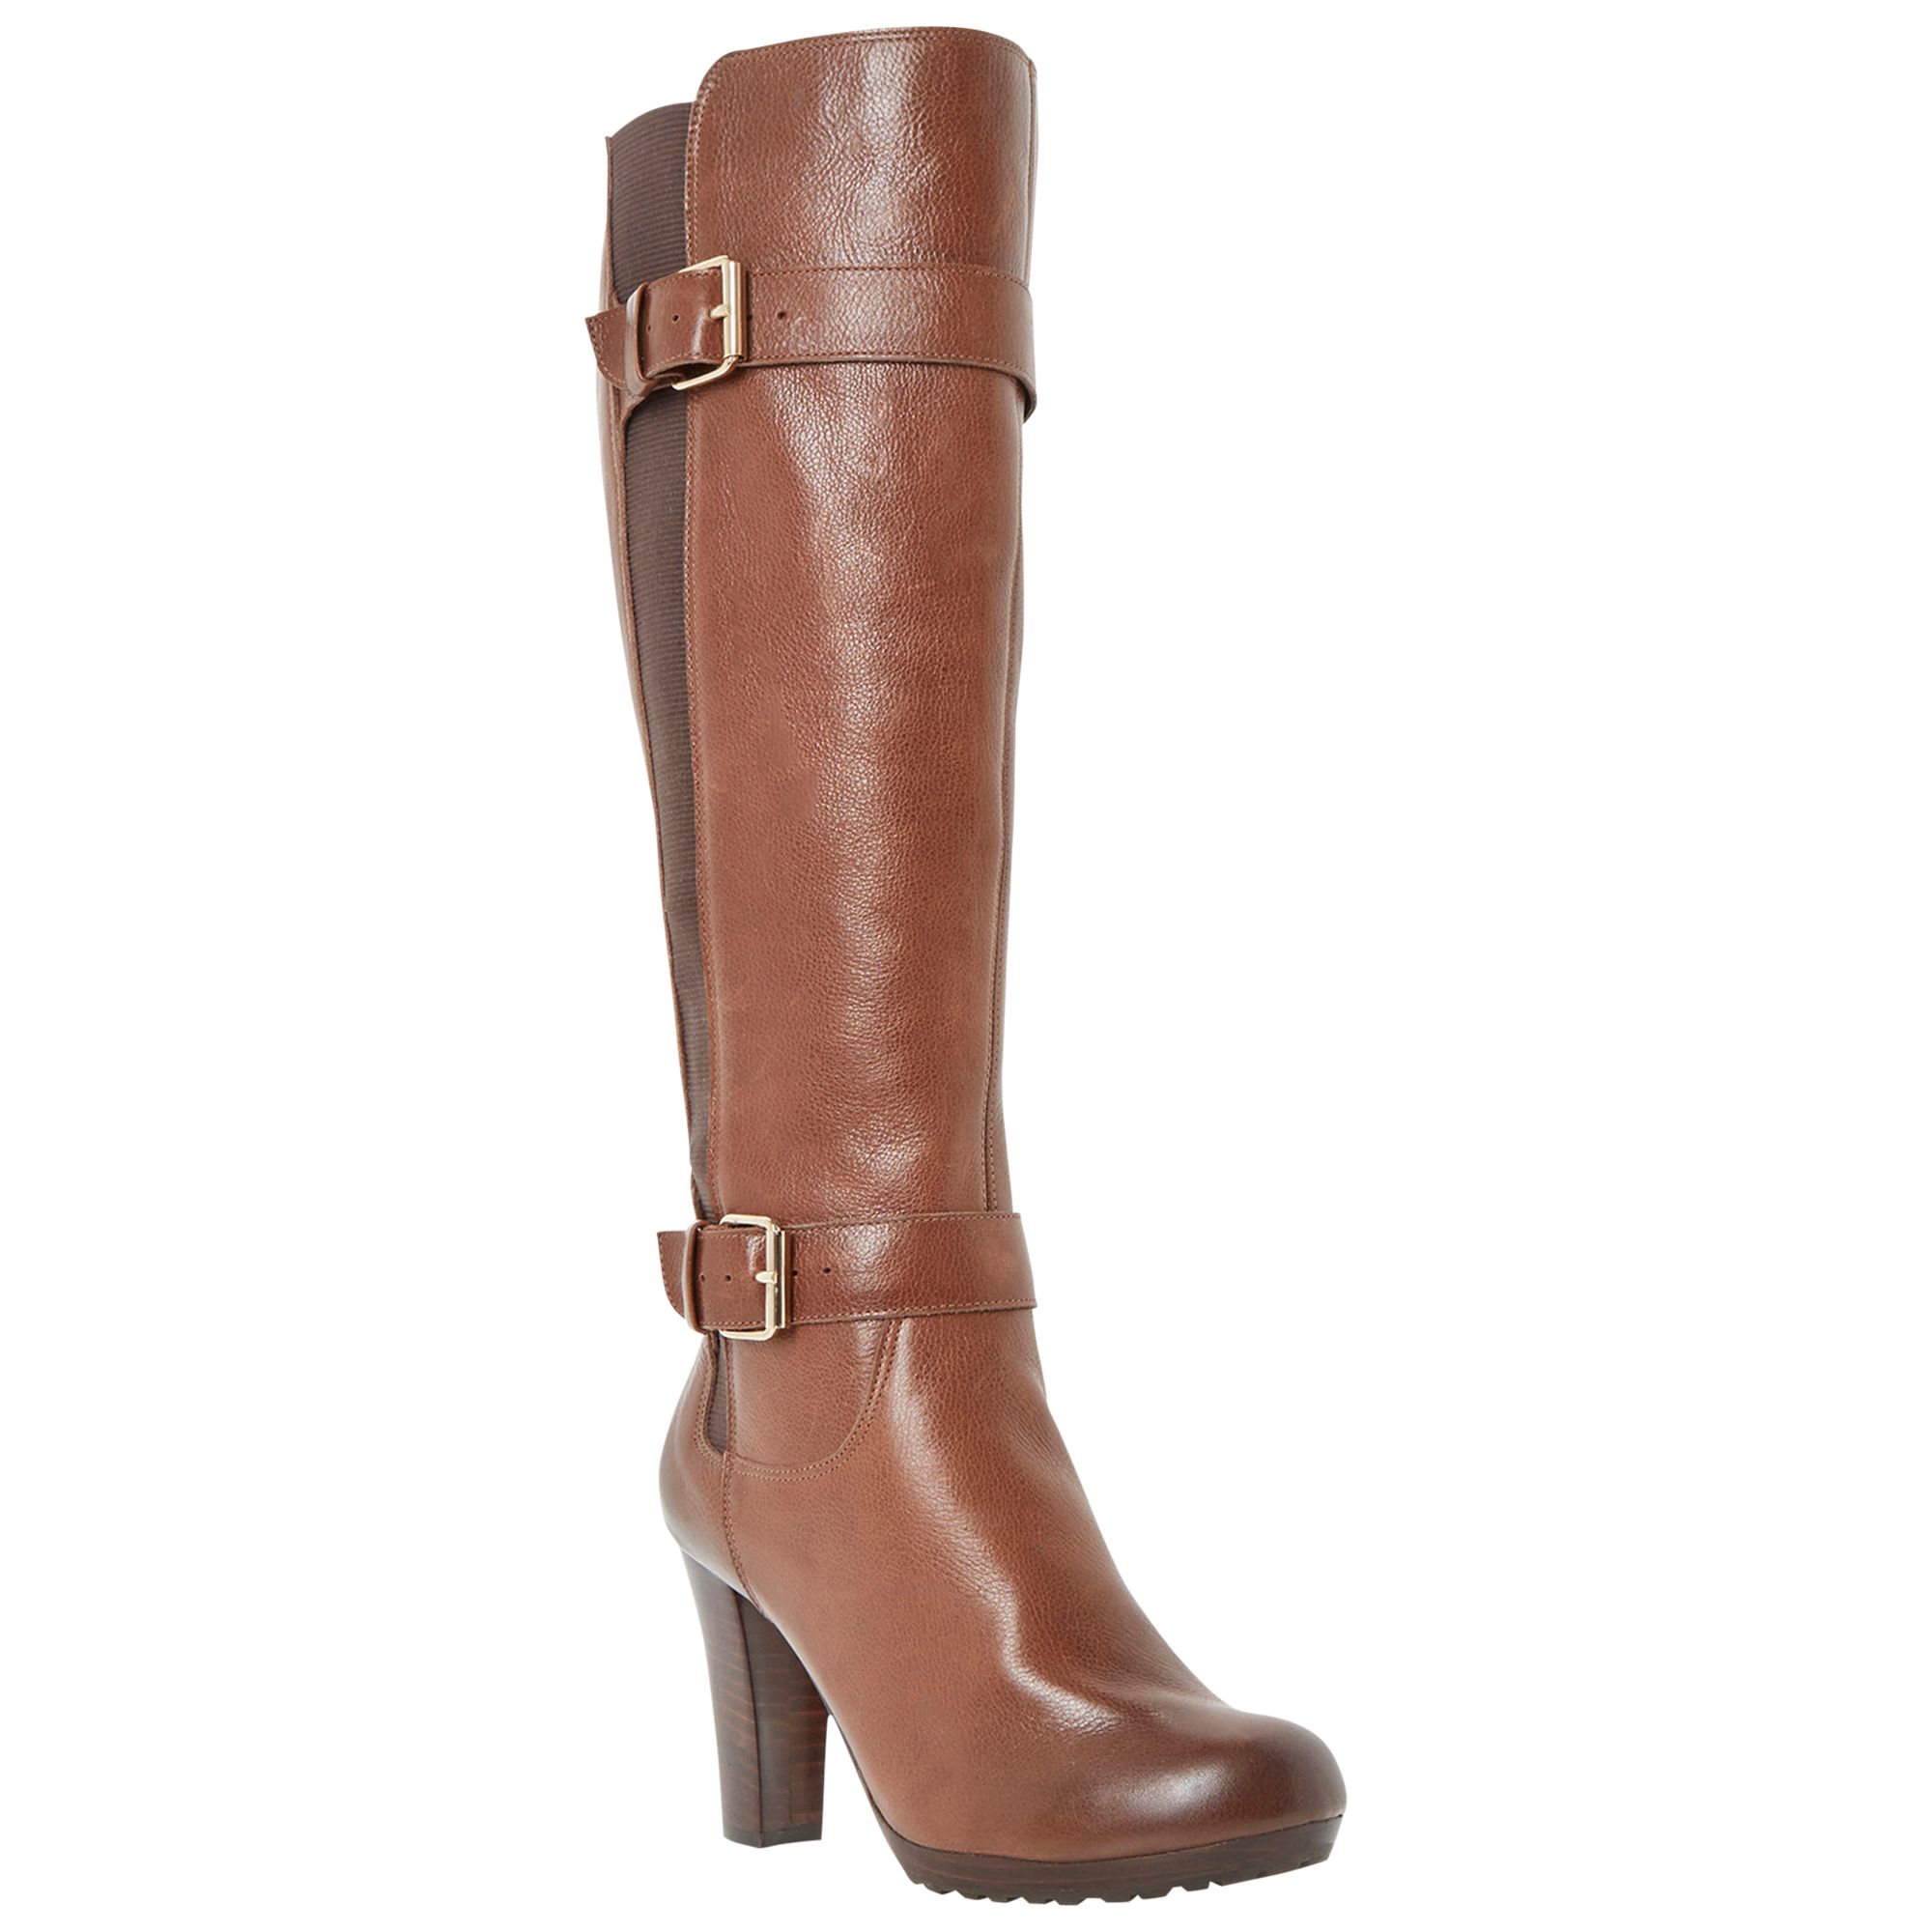 Dune Social Knee-High Leather Buckle Detail Boots